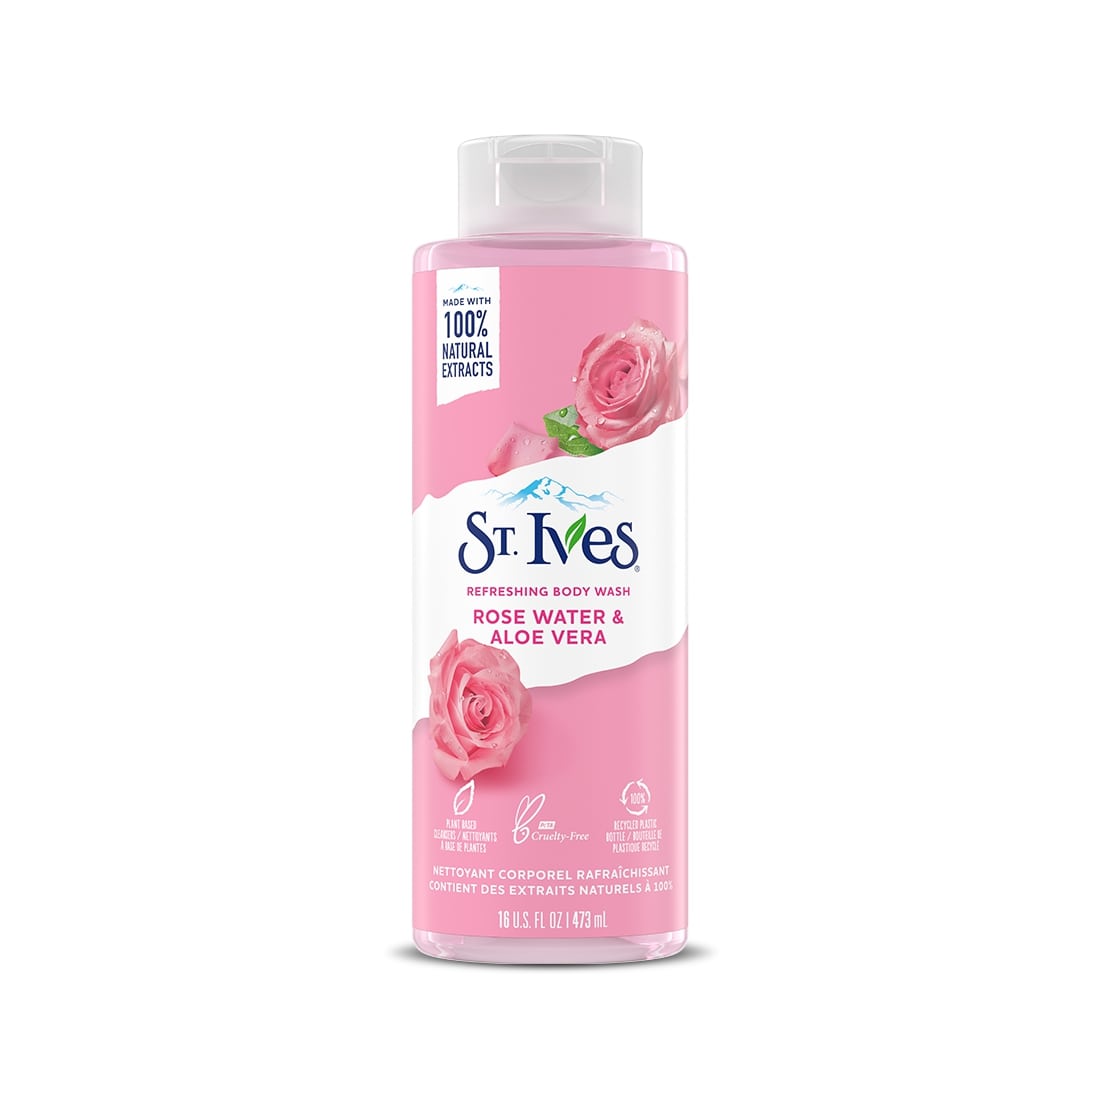 St. Ives Refreshing Rose water & Aloe Vera Flavour Body Wash, 473 ml, Pack of 1 